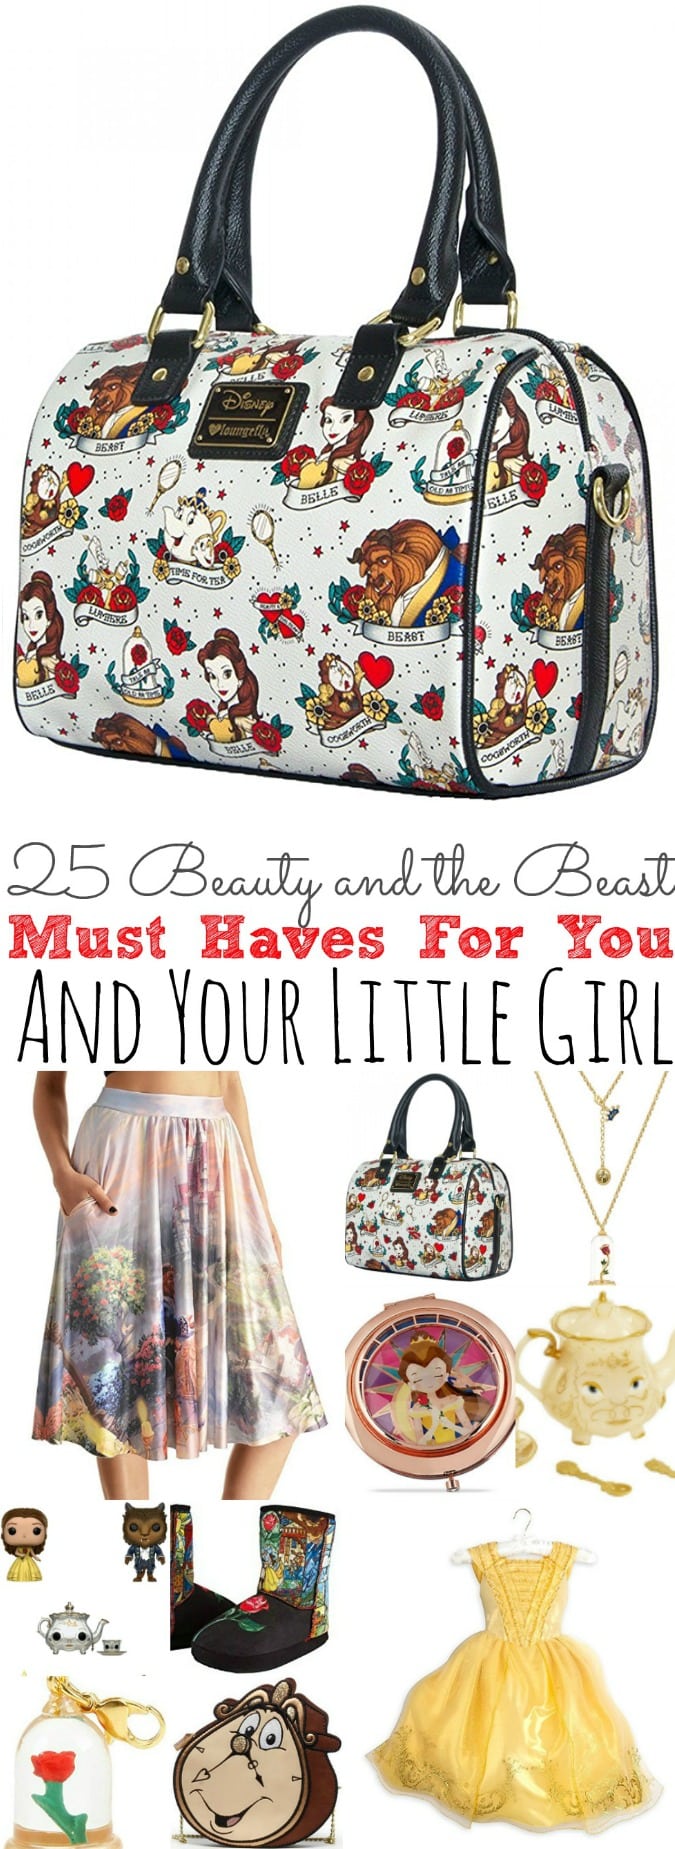 25 Beauty and the Beast Must Haves For You and Your Little Girl - simplytodaylife.com